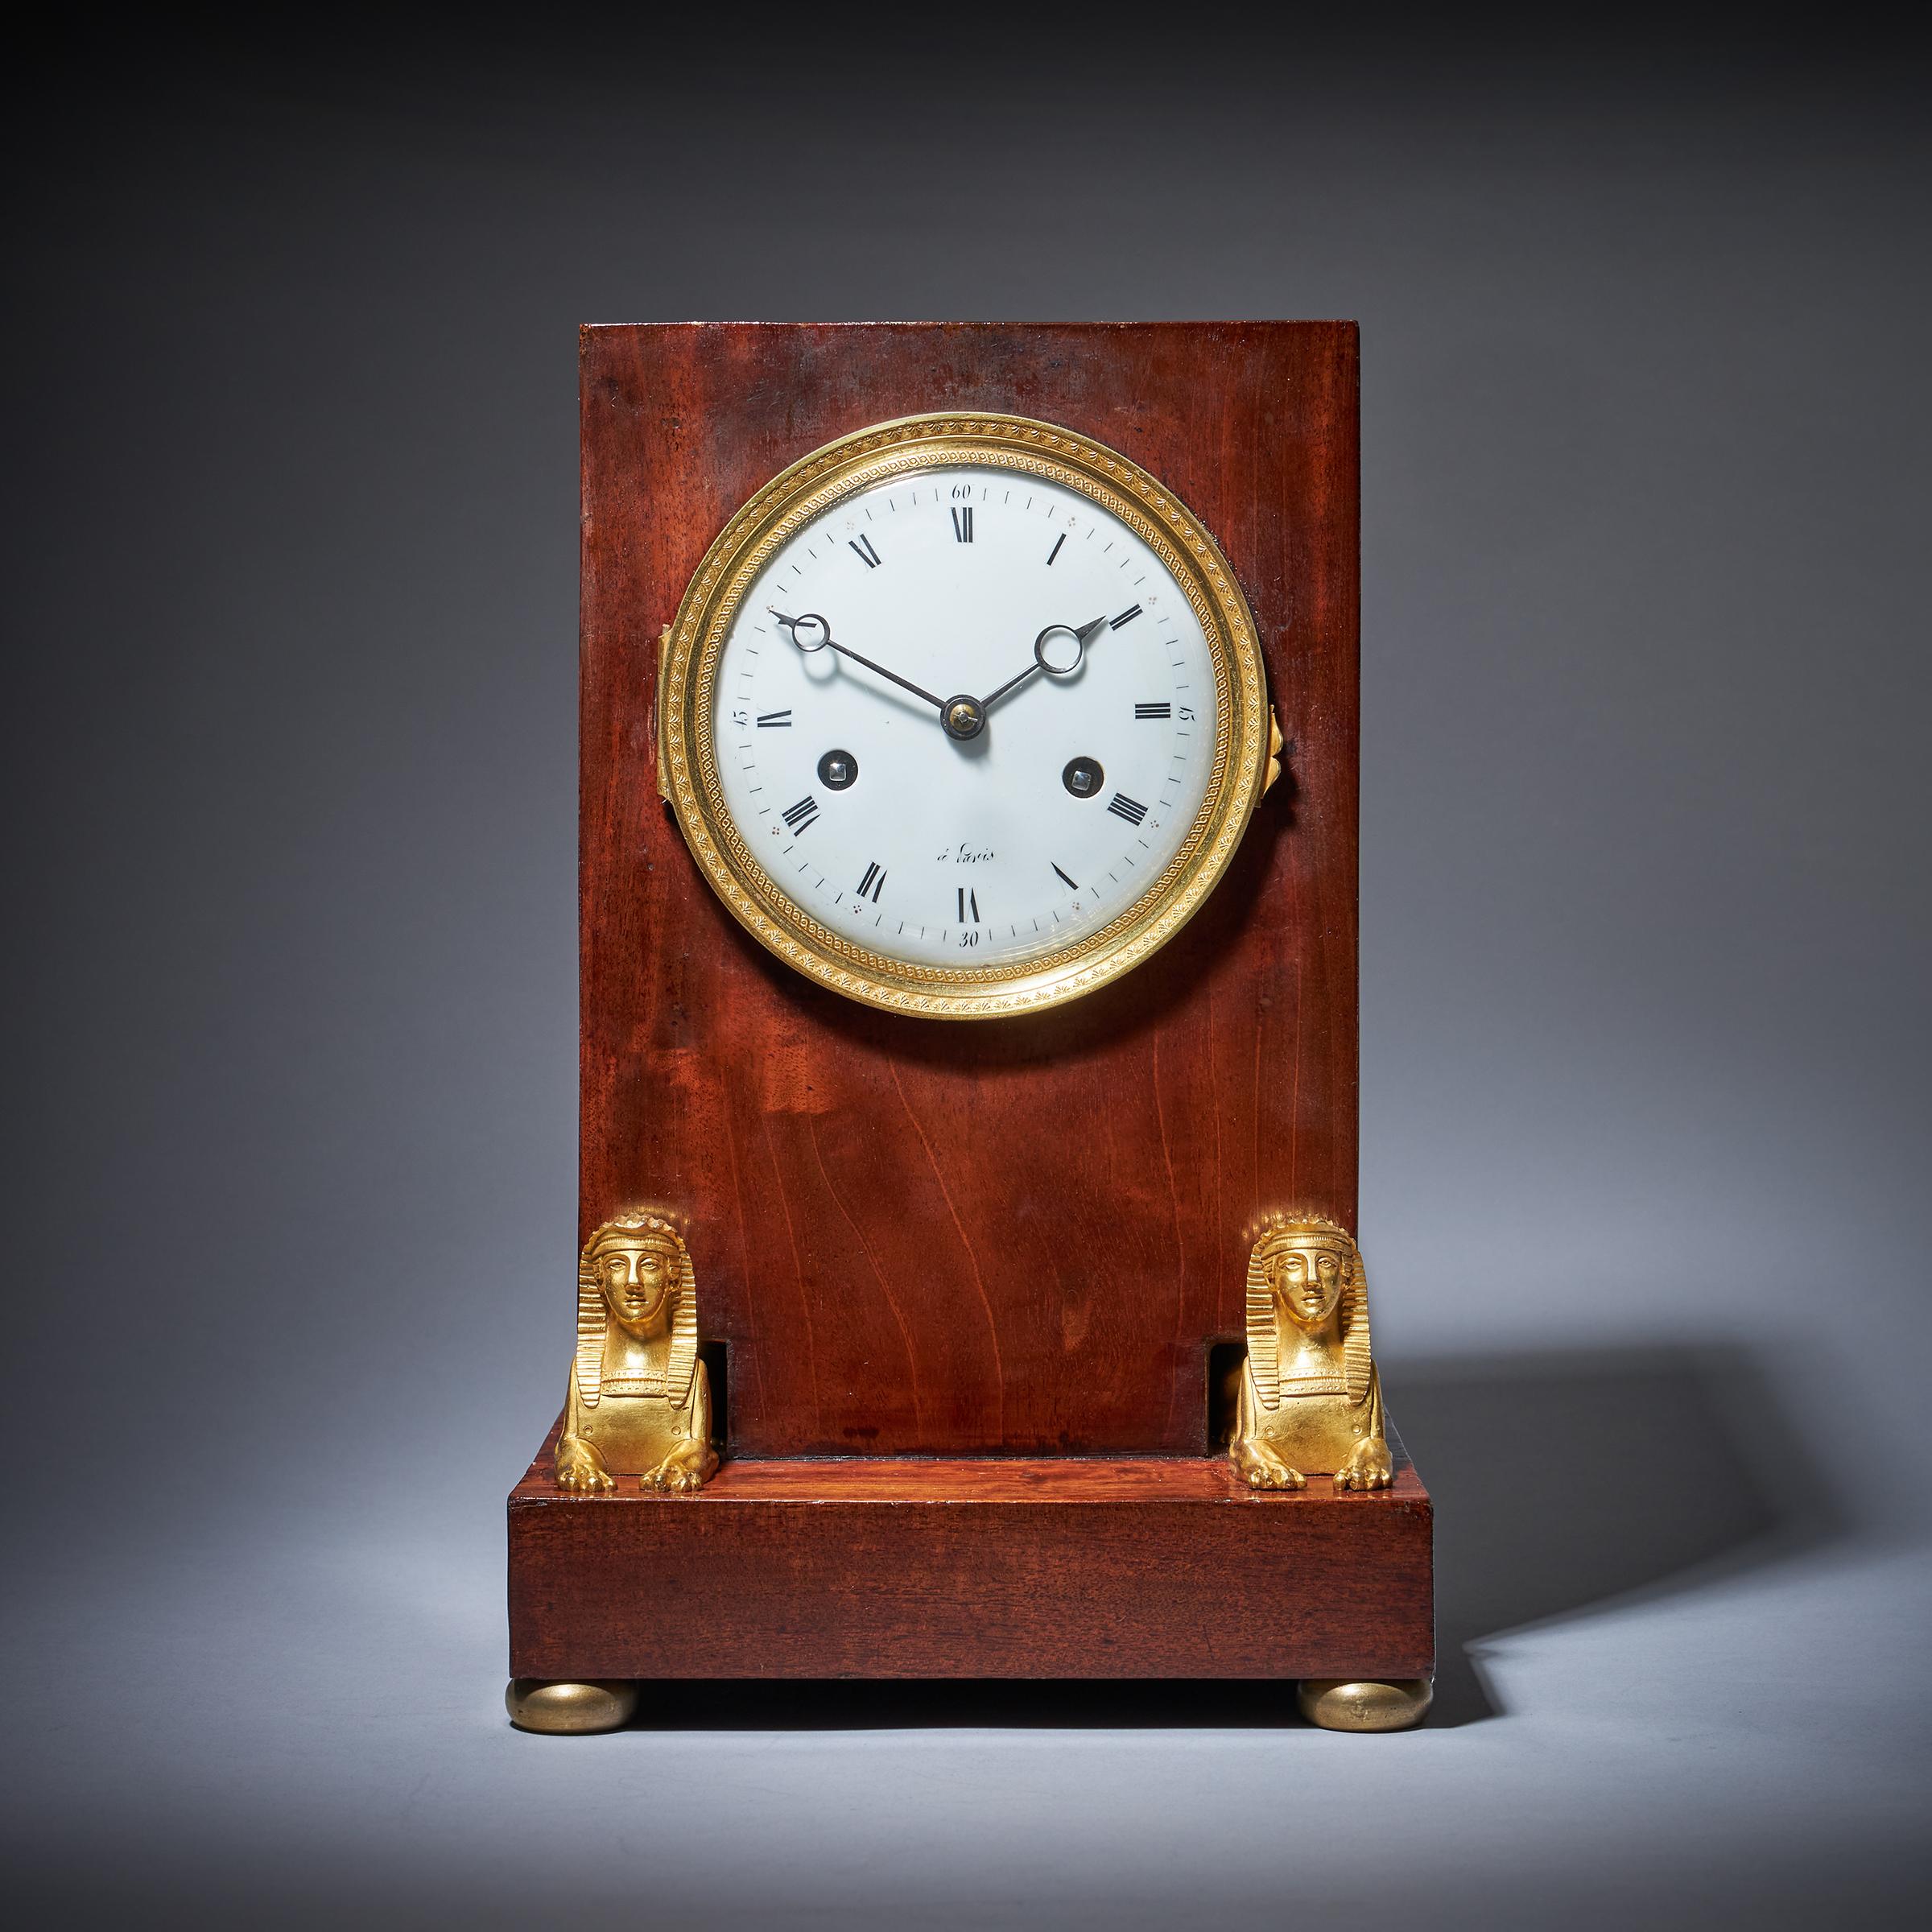 A superb 19th century French Flame Mahogany Napoleon Empire Period Egyptian style Mantel Clock

This clock was produced in the French Empire period, in the first quarter of the nineteenth century. At a result of Napoleon’s Campaign in Egypt there